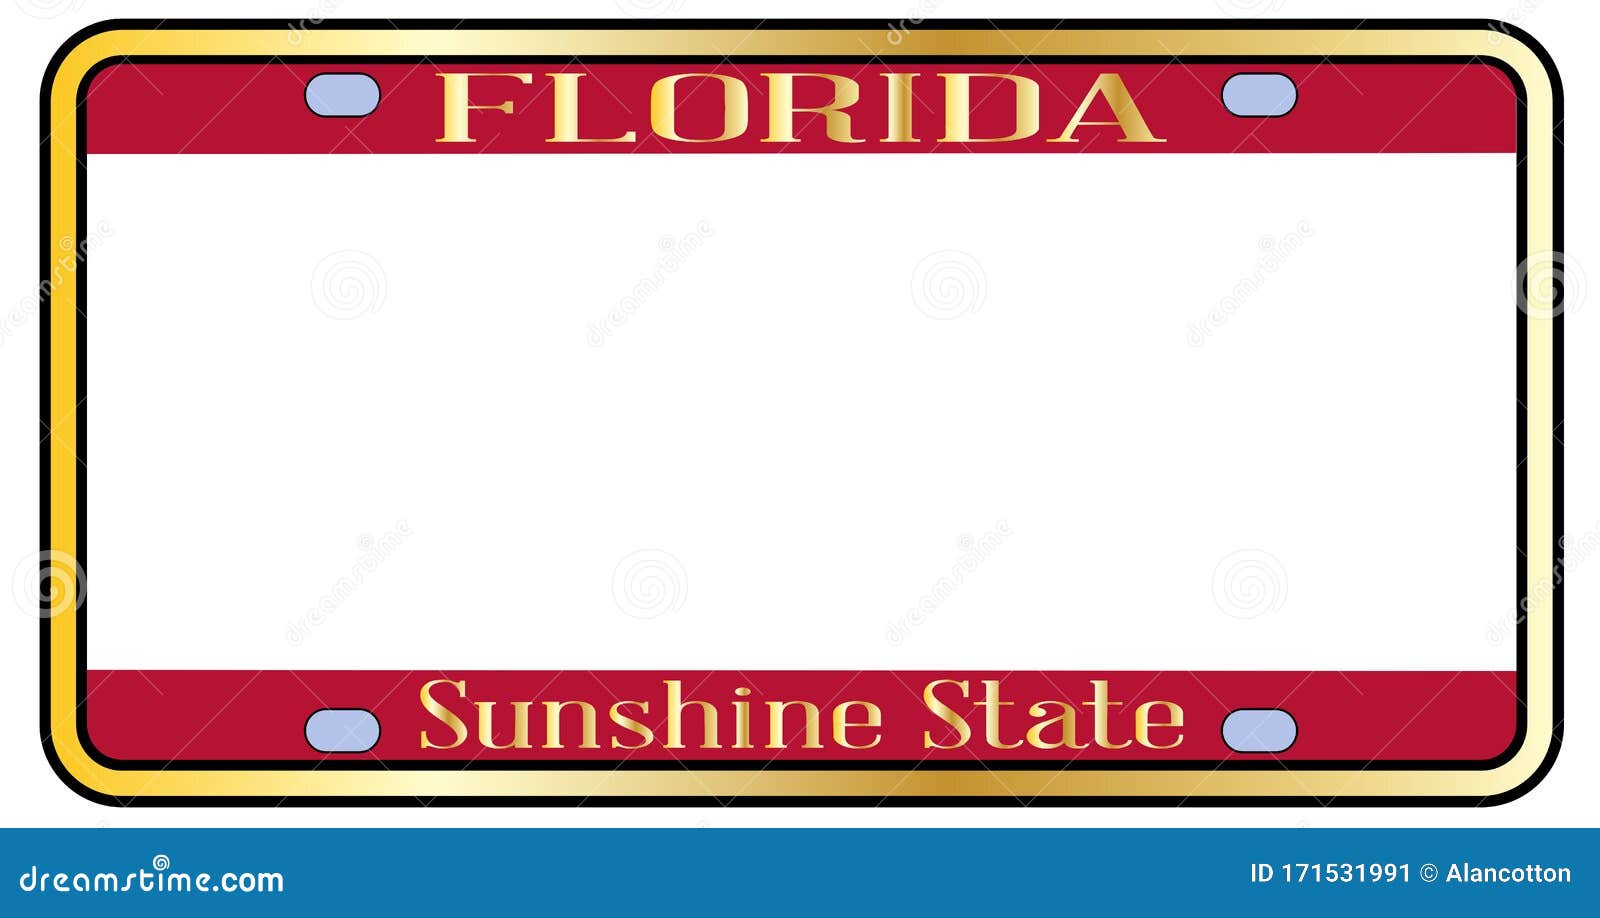 Florida License Plate Template